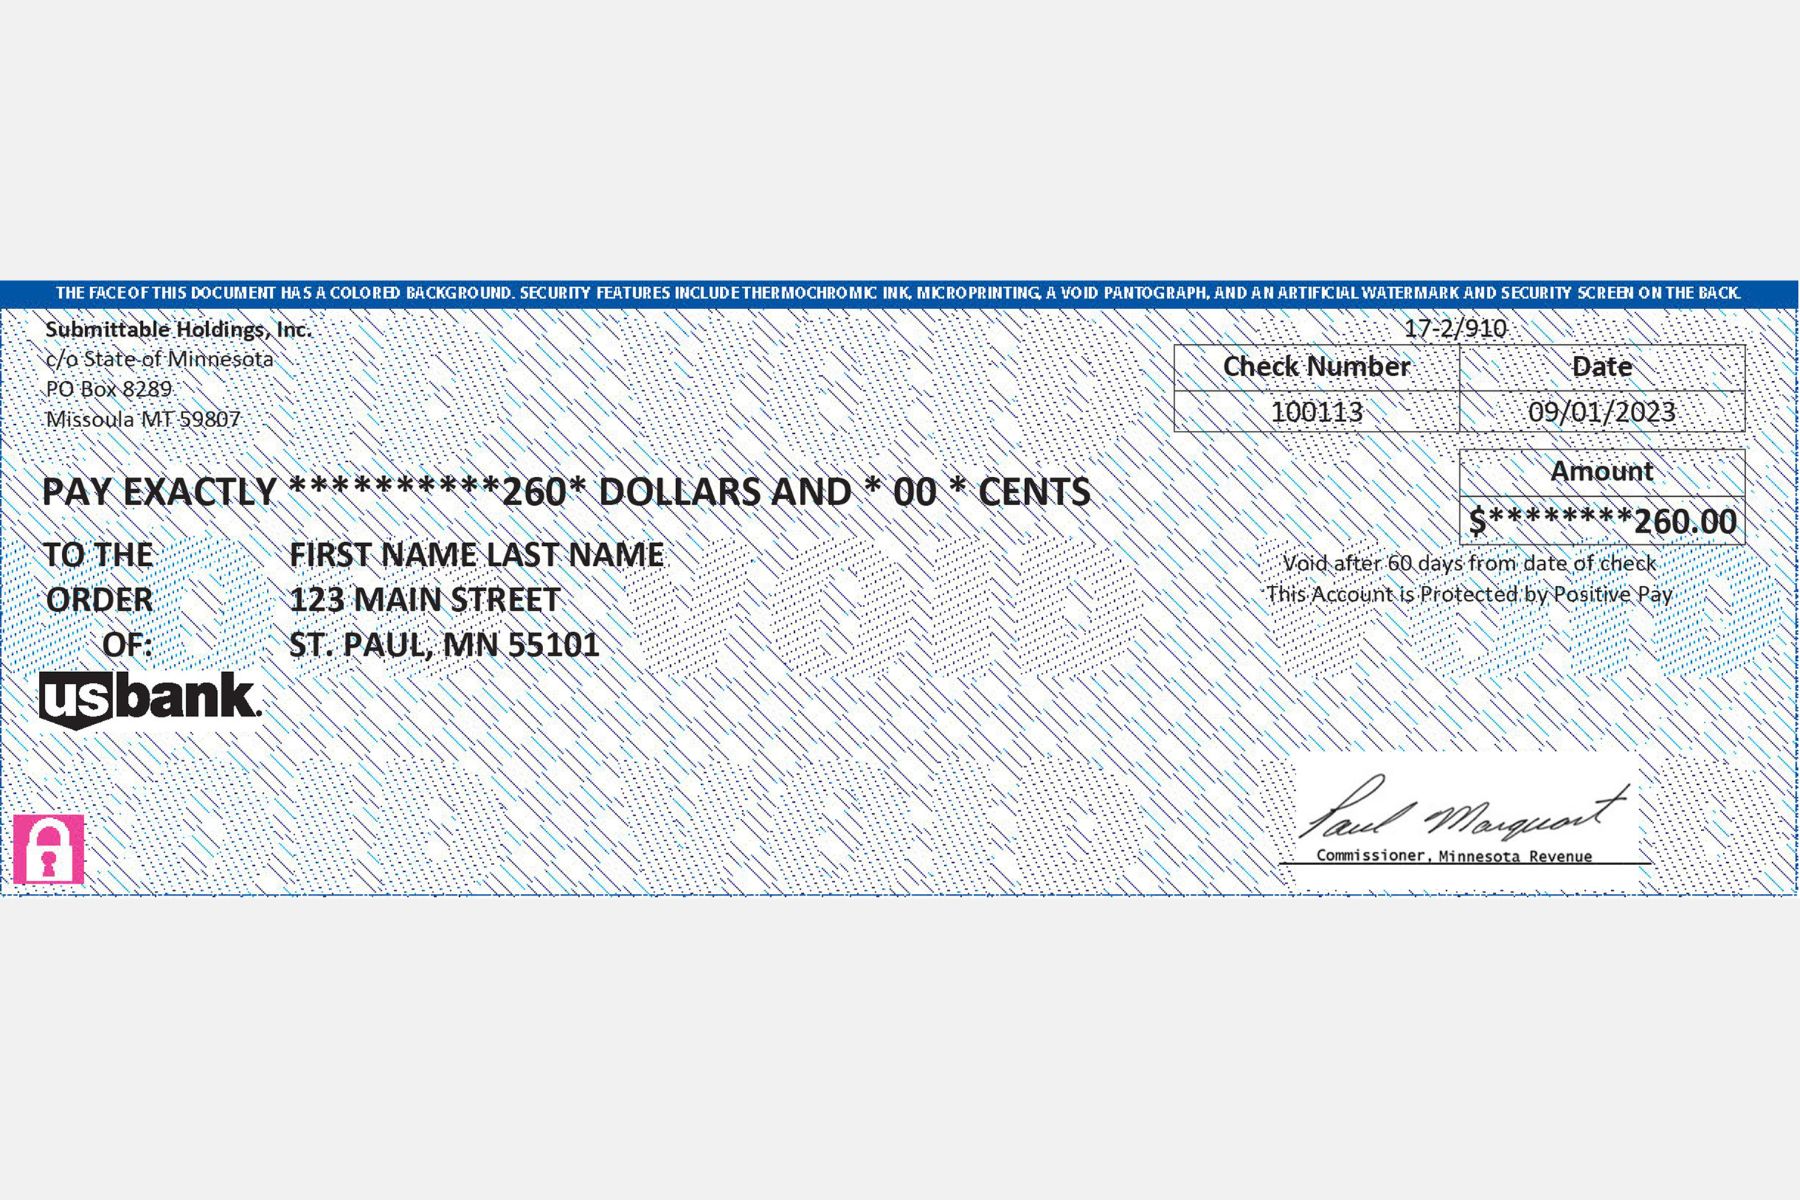 What to look out for for when your Minnesota rebate check arrives